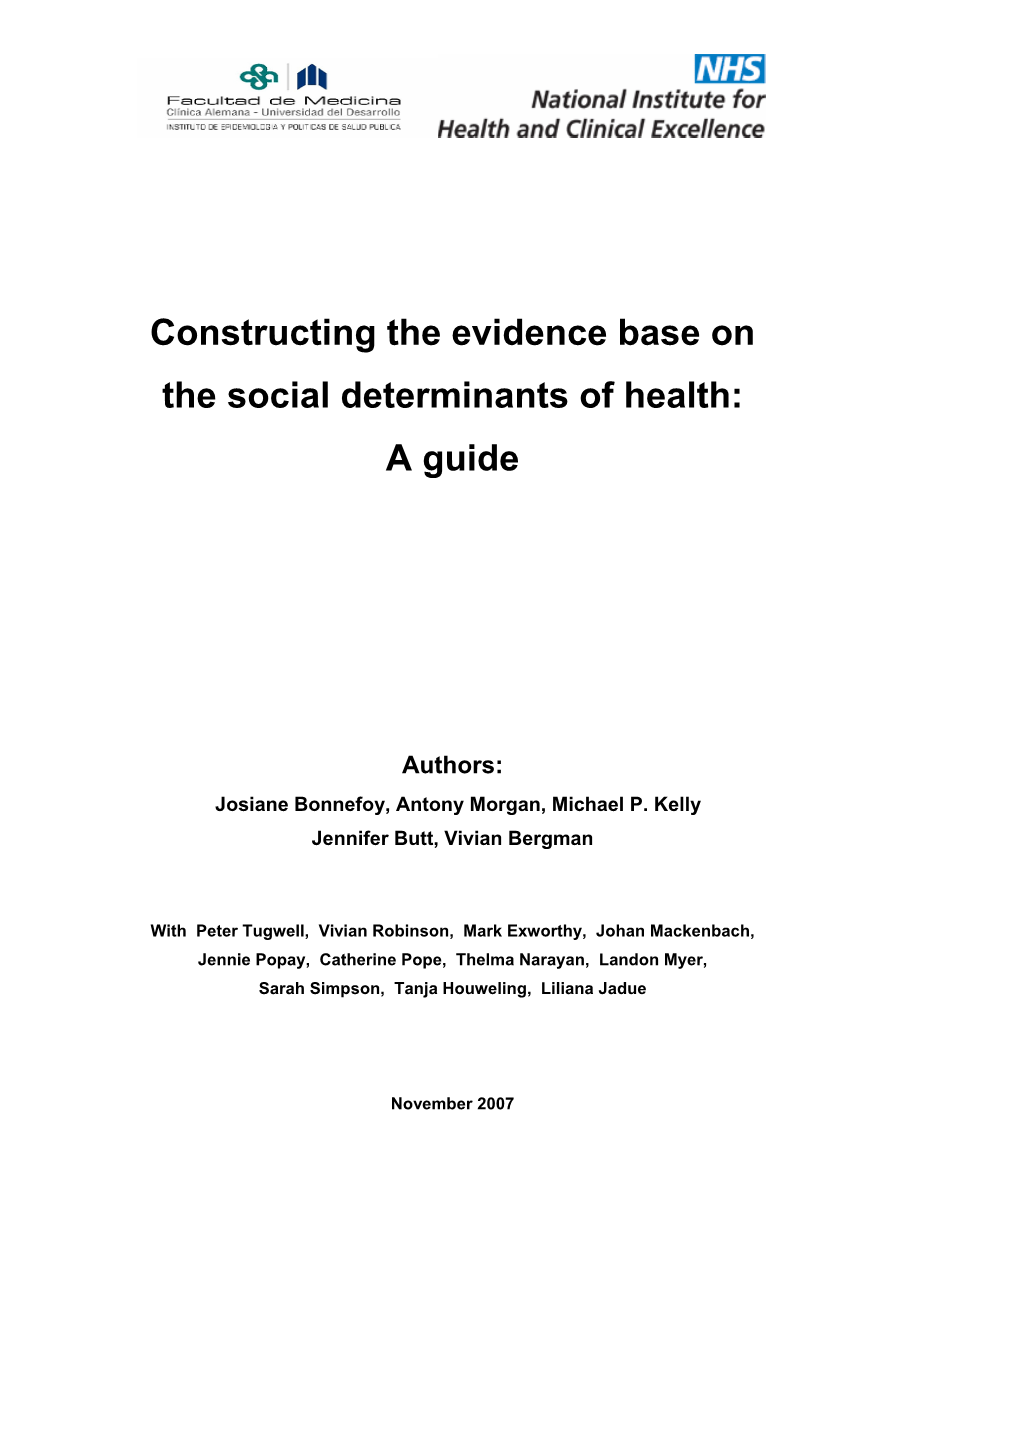 Constructing the Evidence Base on the Social Determinants of Health: a Guide